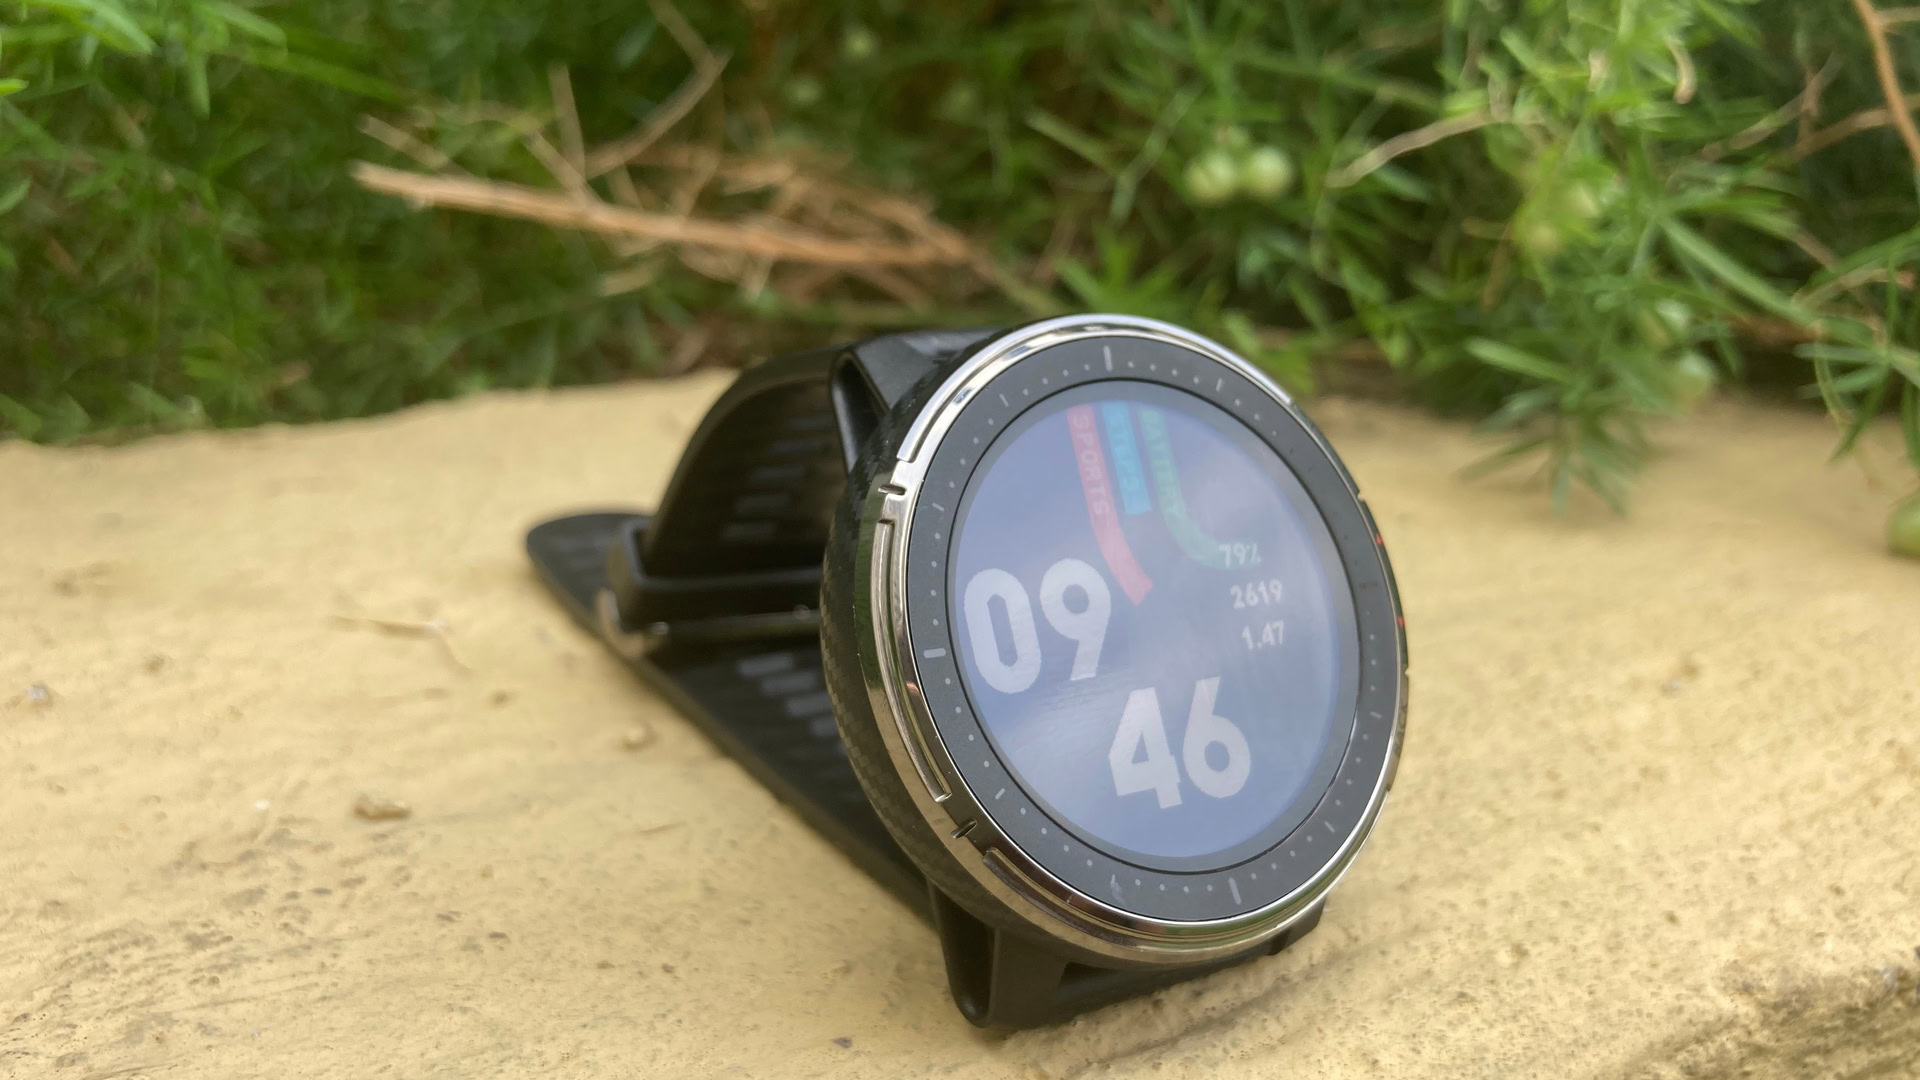 Amazfit Stratos 3 With Up to 14-Day Battery Life, 5ATM Water Resistance  Launched in India